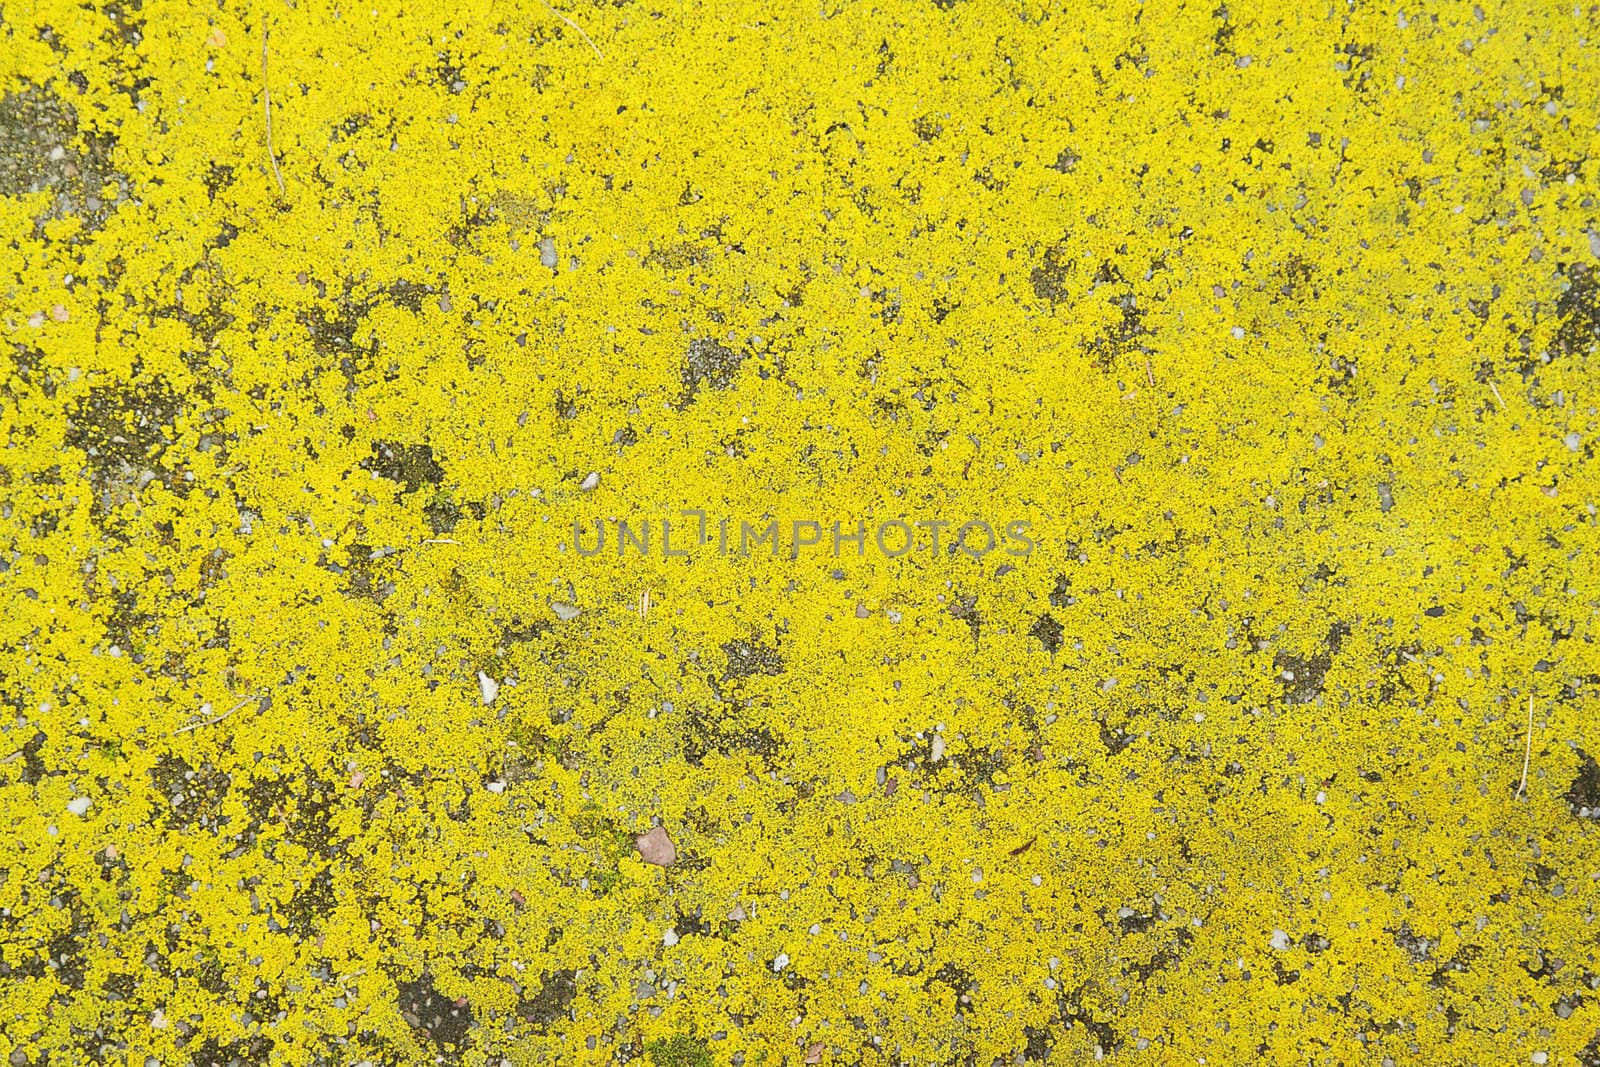 Background with bright yellow moss on asphalt